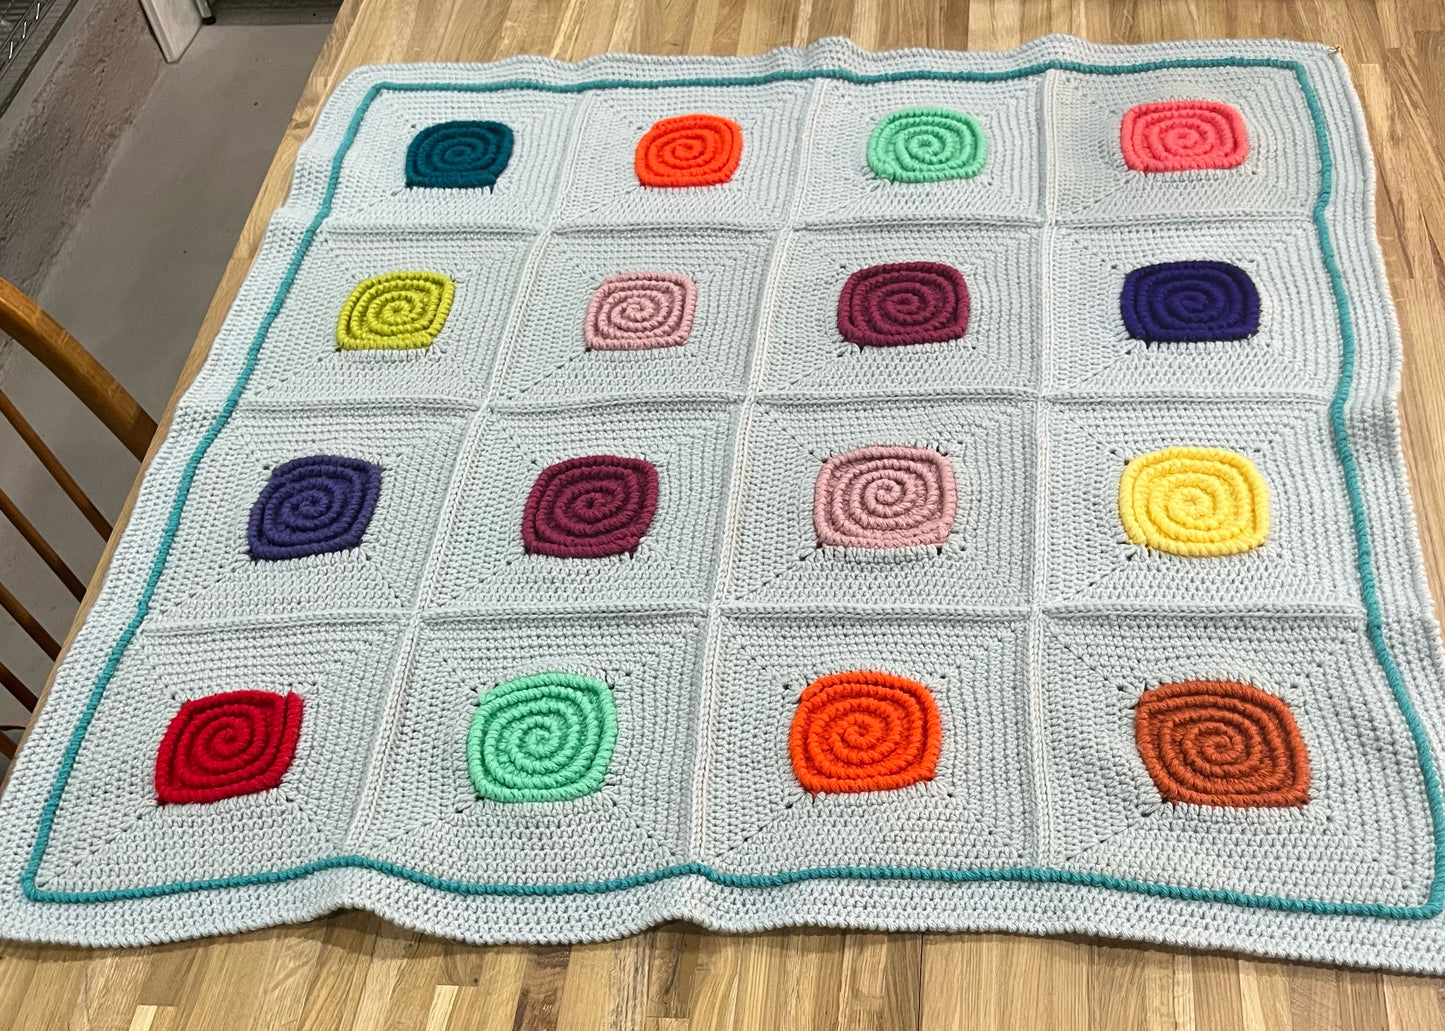 Crocheted Blanket - 36 x 36 Granny Square Light Grey with Bright Color Circles